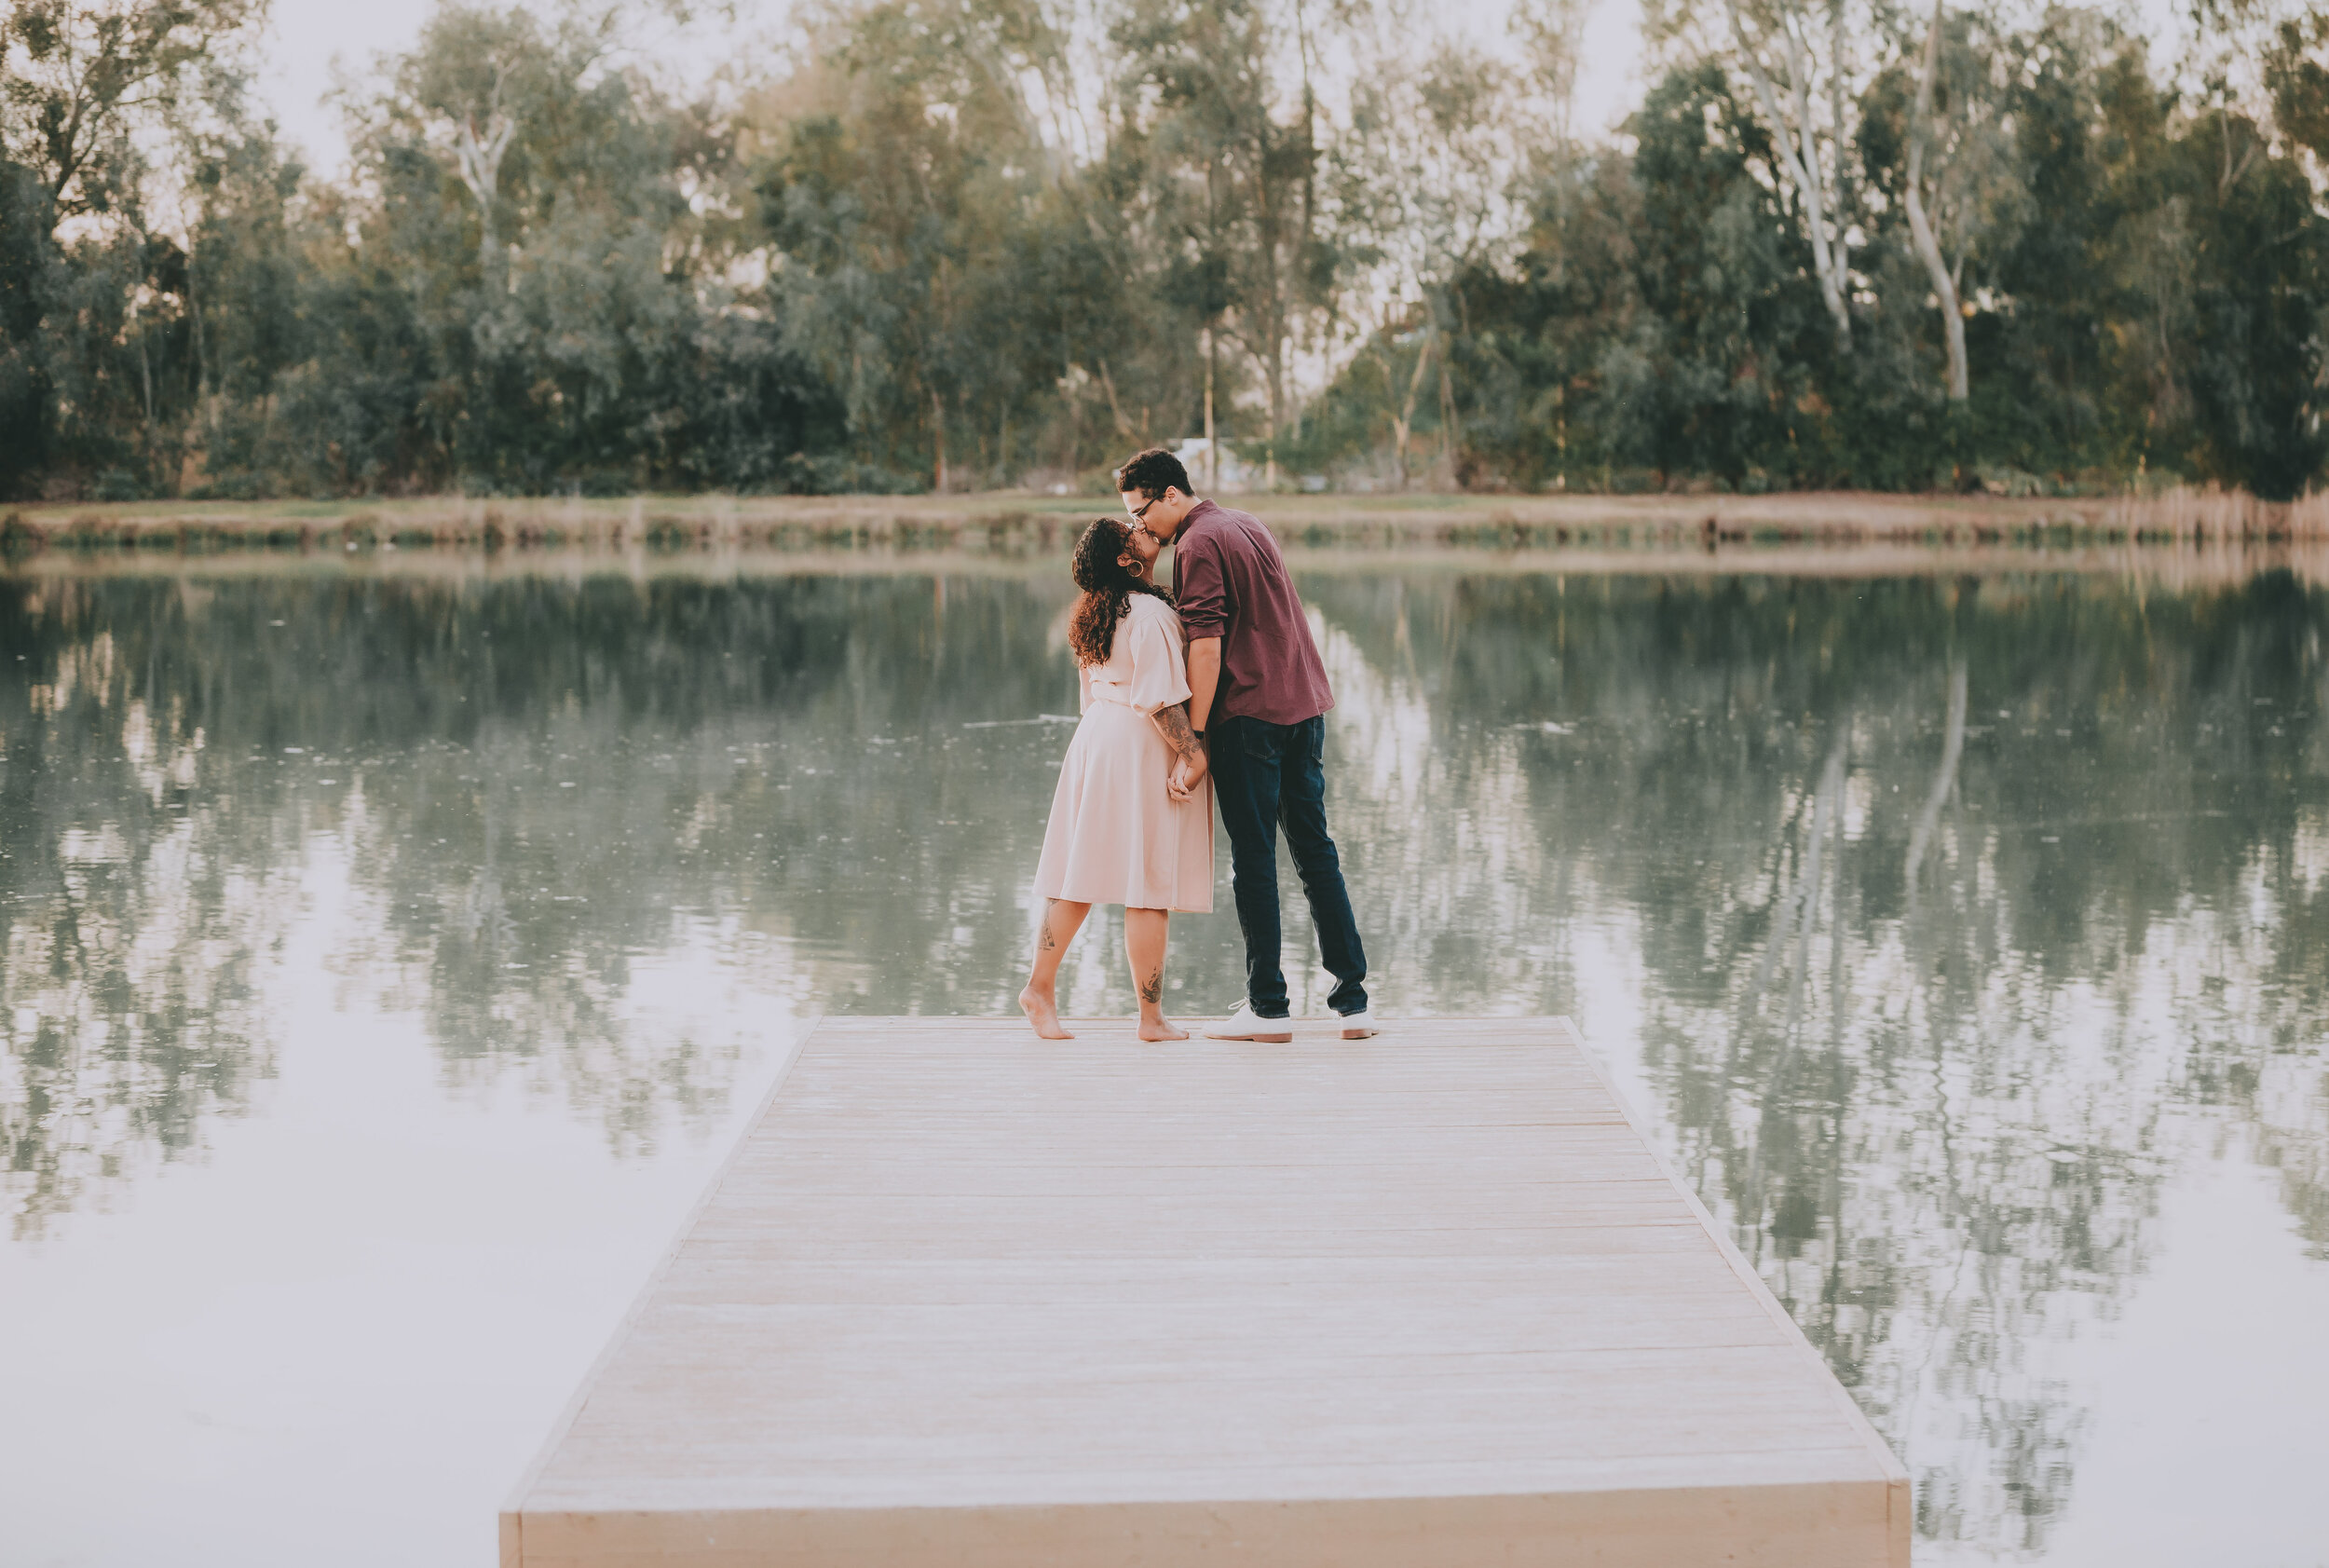 Fresno Engagament Photos - Wolf Lakes - The Clausen Gallery - Aleksis and Scott -24.jpg